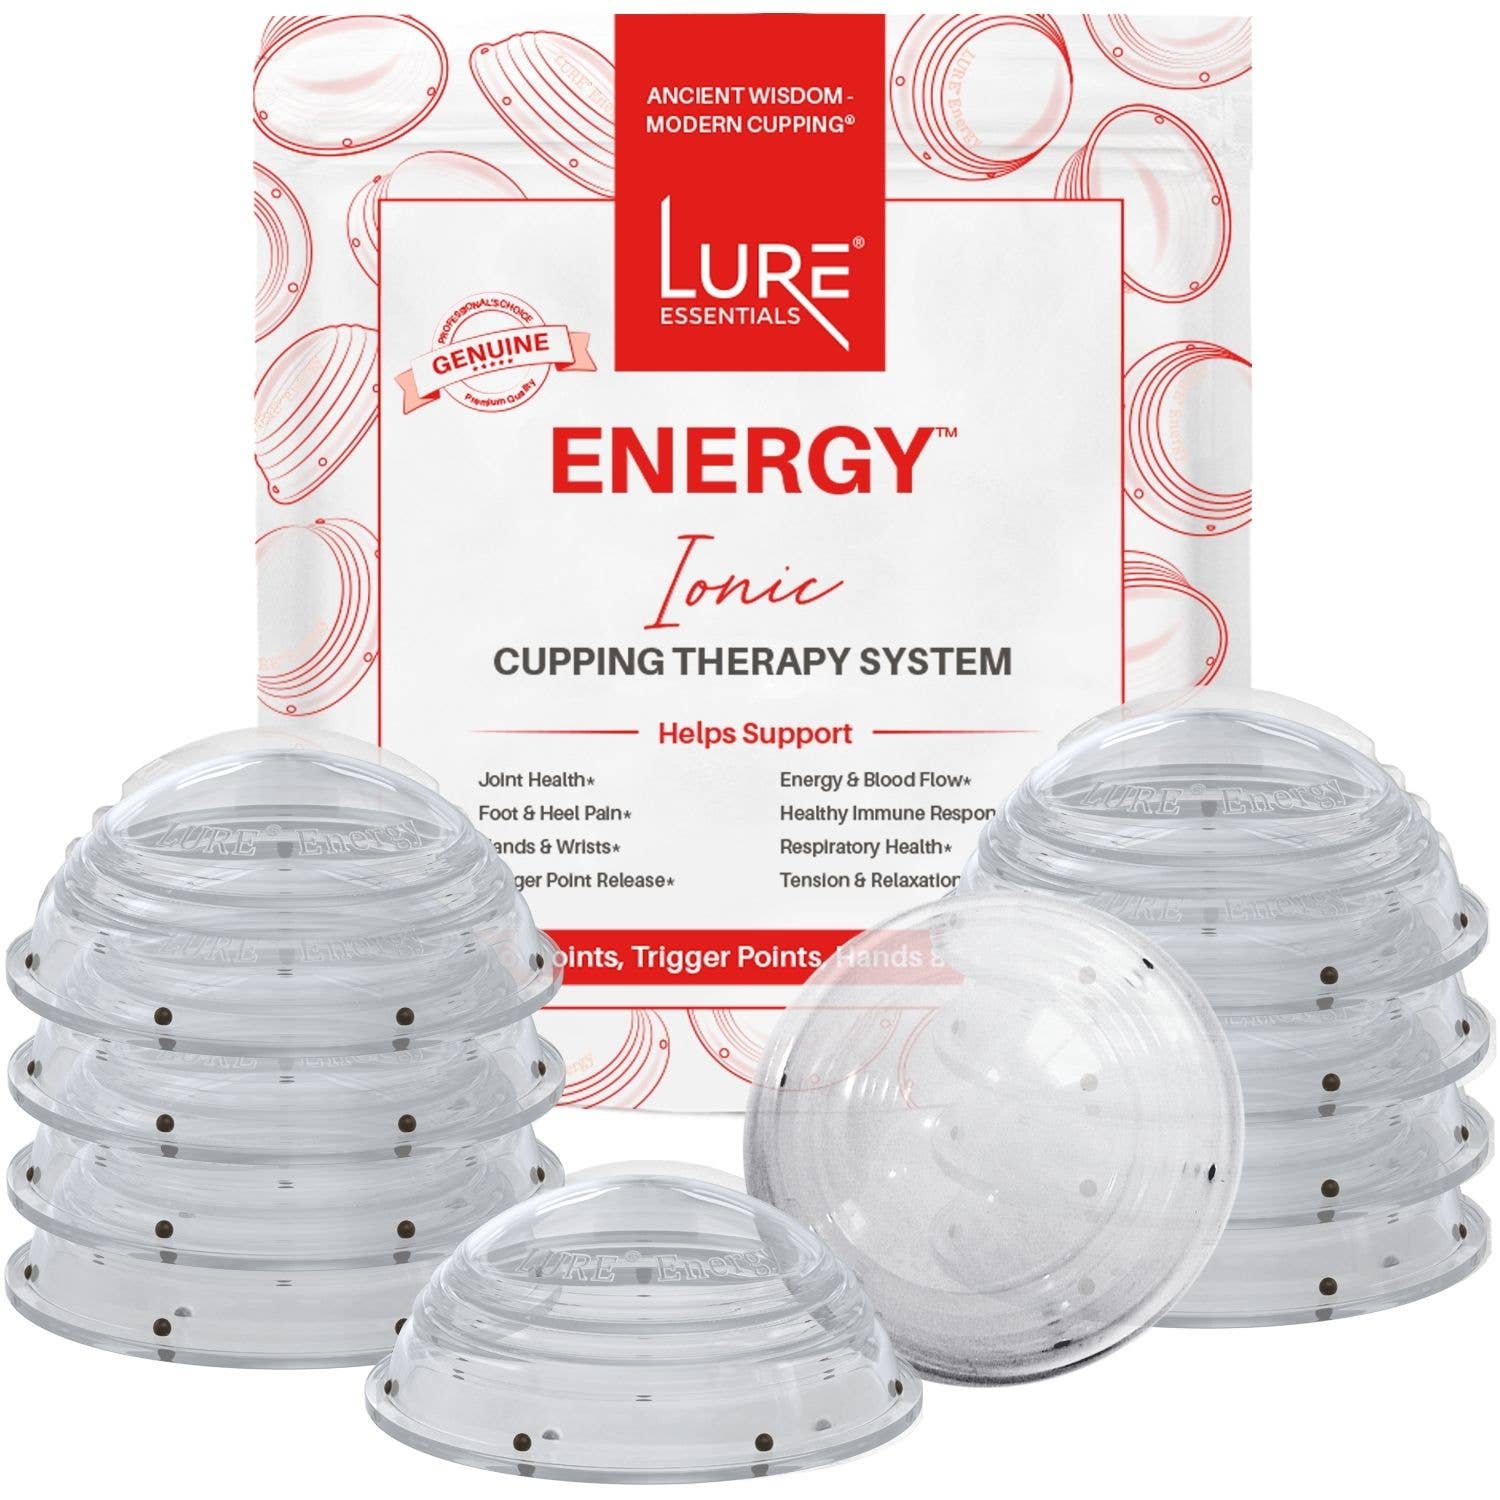 Wholesale Ionic Energy - Cupping Therapy Set For Trigger Points & Joints  for your store - Faire